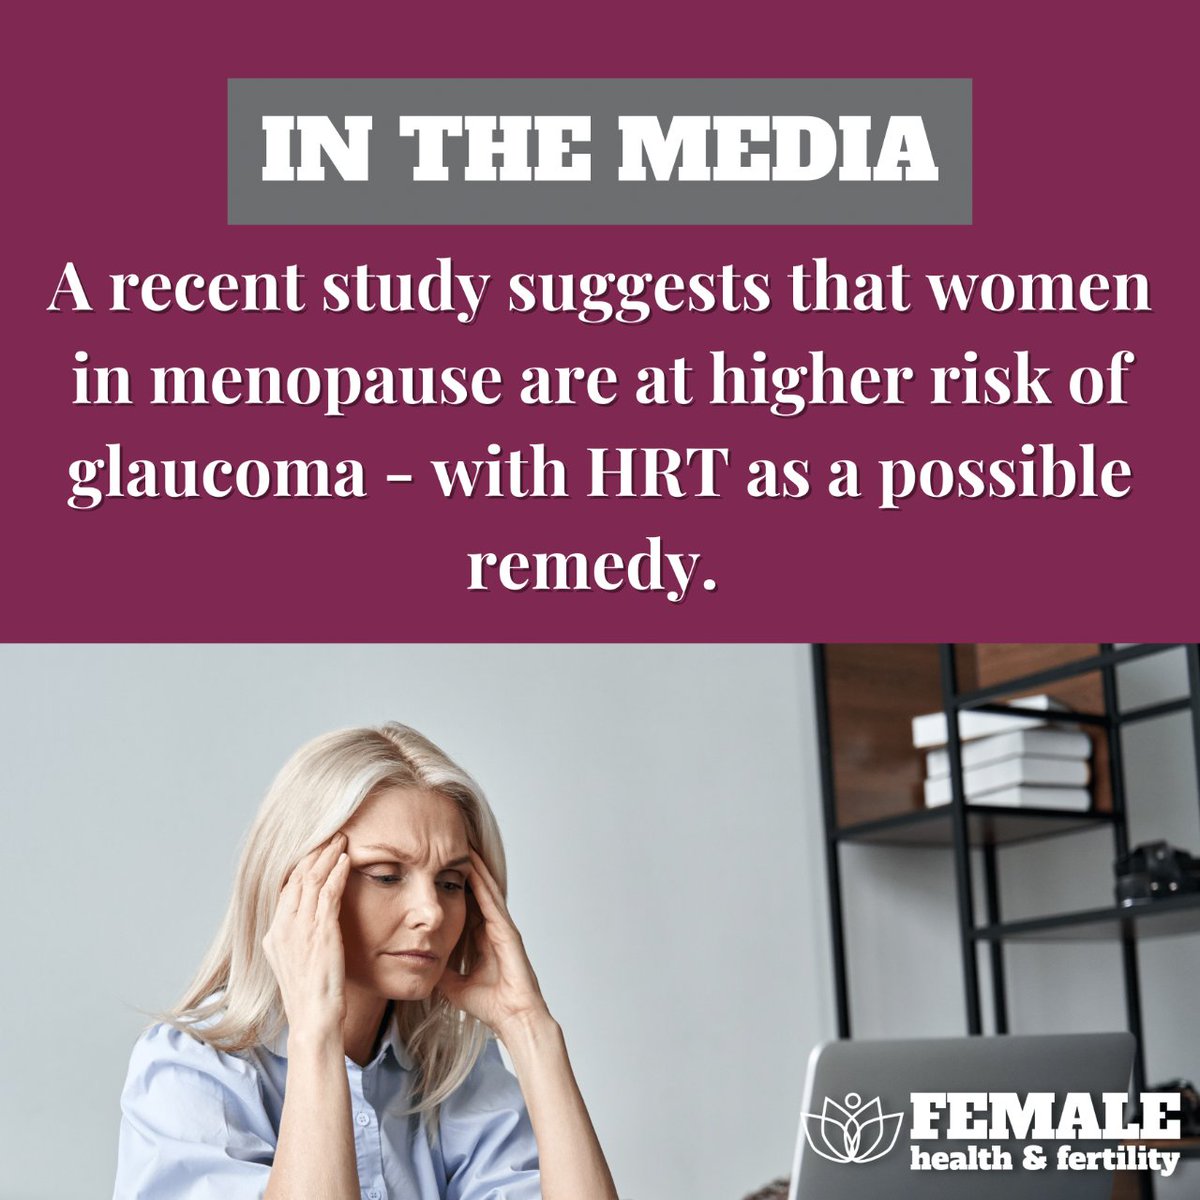 A new study published in Cellular and Molecular Neurobiology suggests the role of decreasing estrogen levels in a higher risk of glaucoma for women in menopause. 

#menopause #menopausenews #menopausesupport